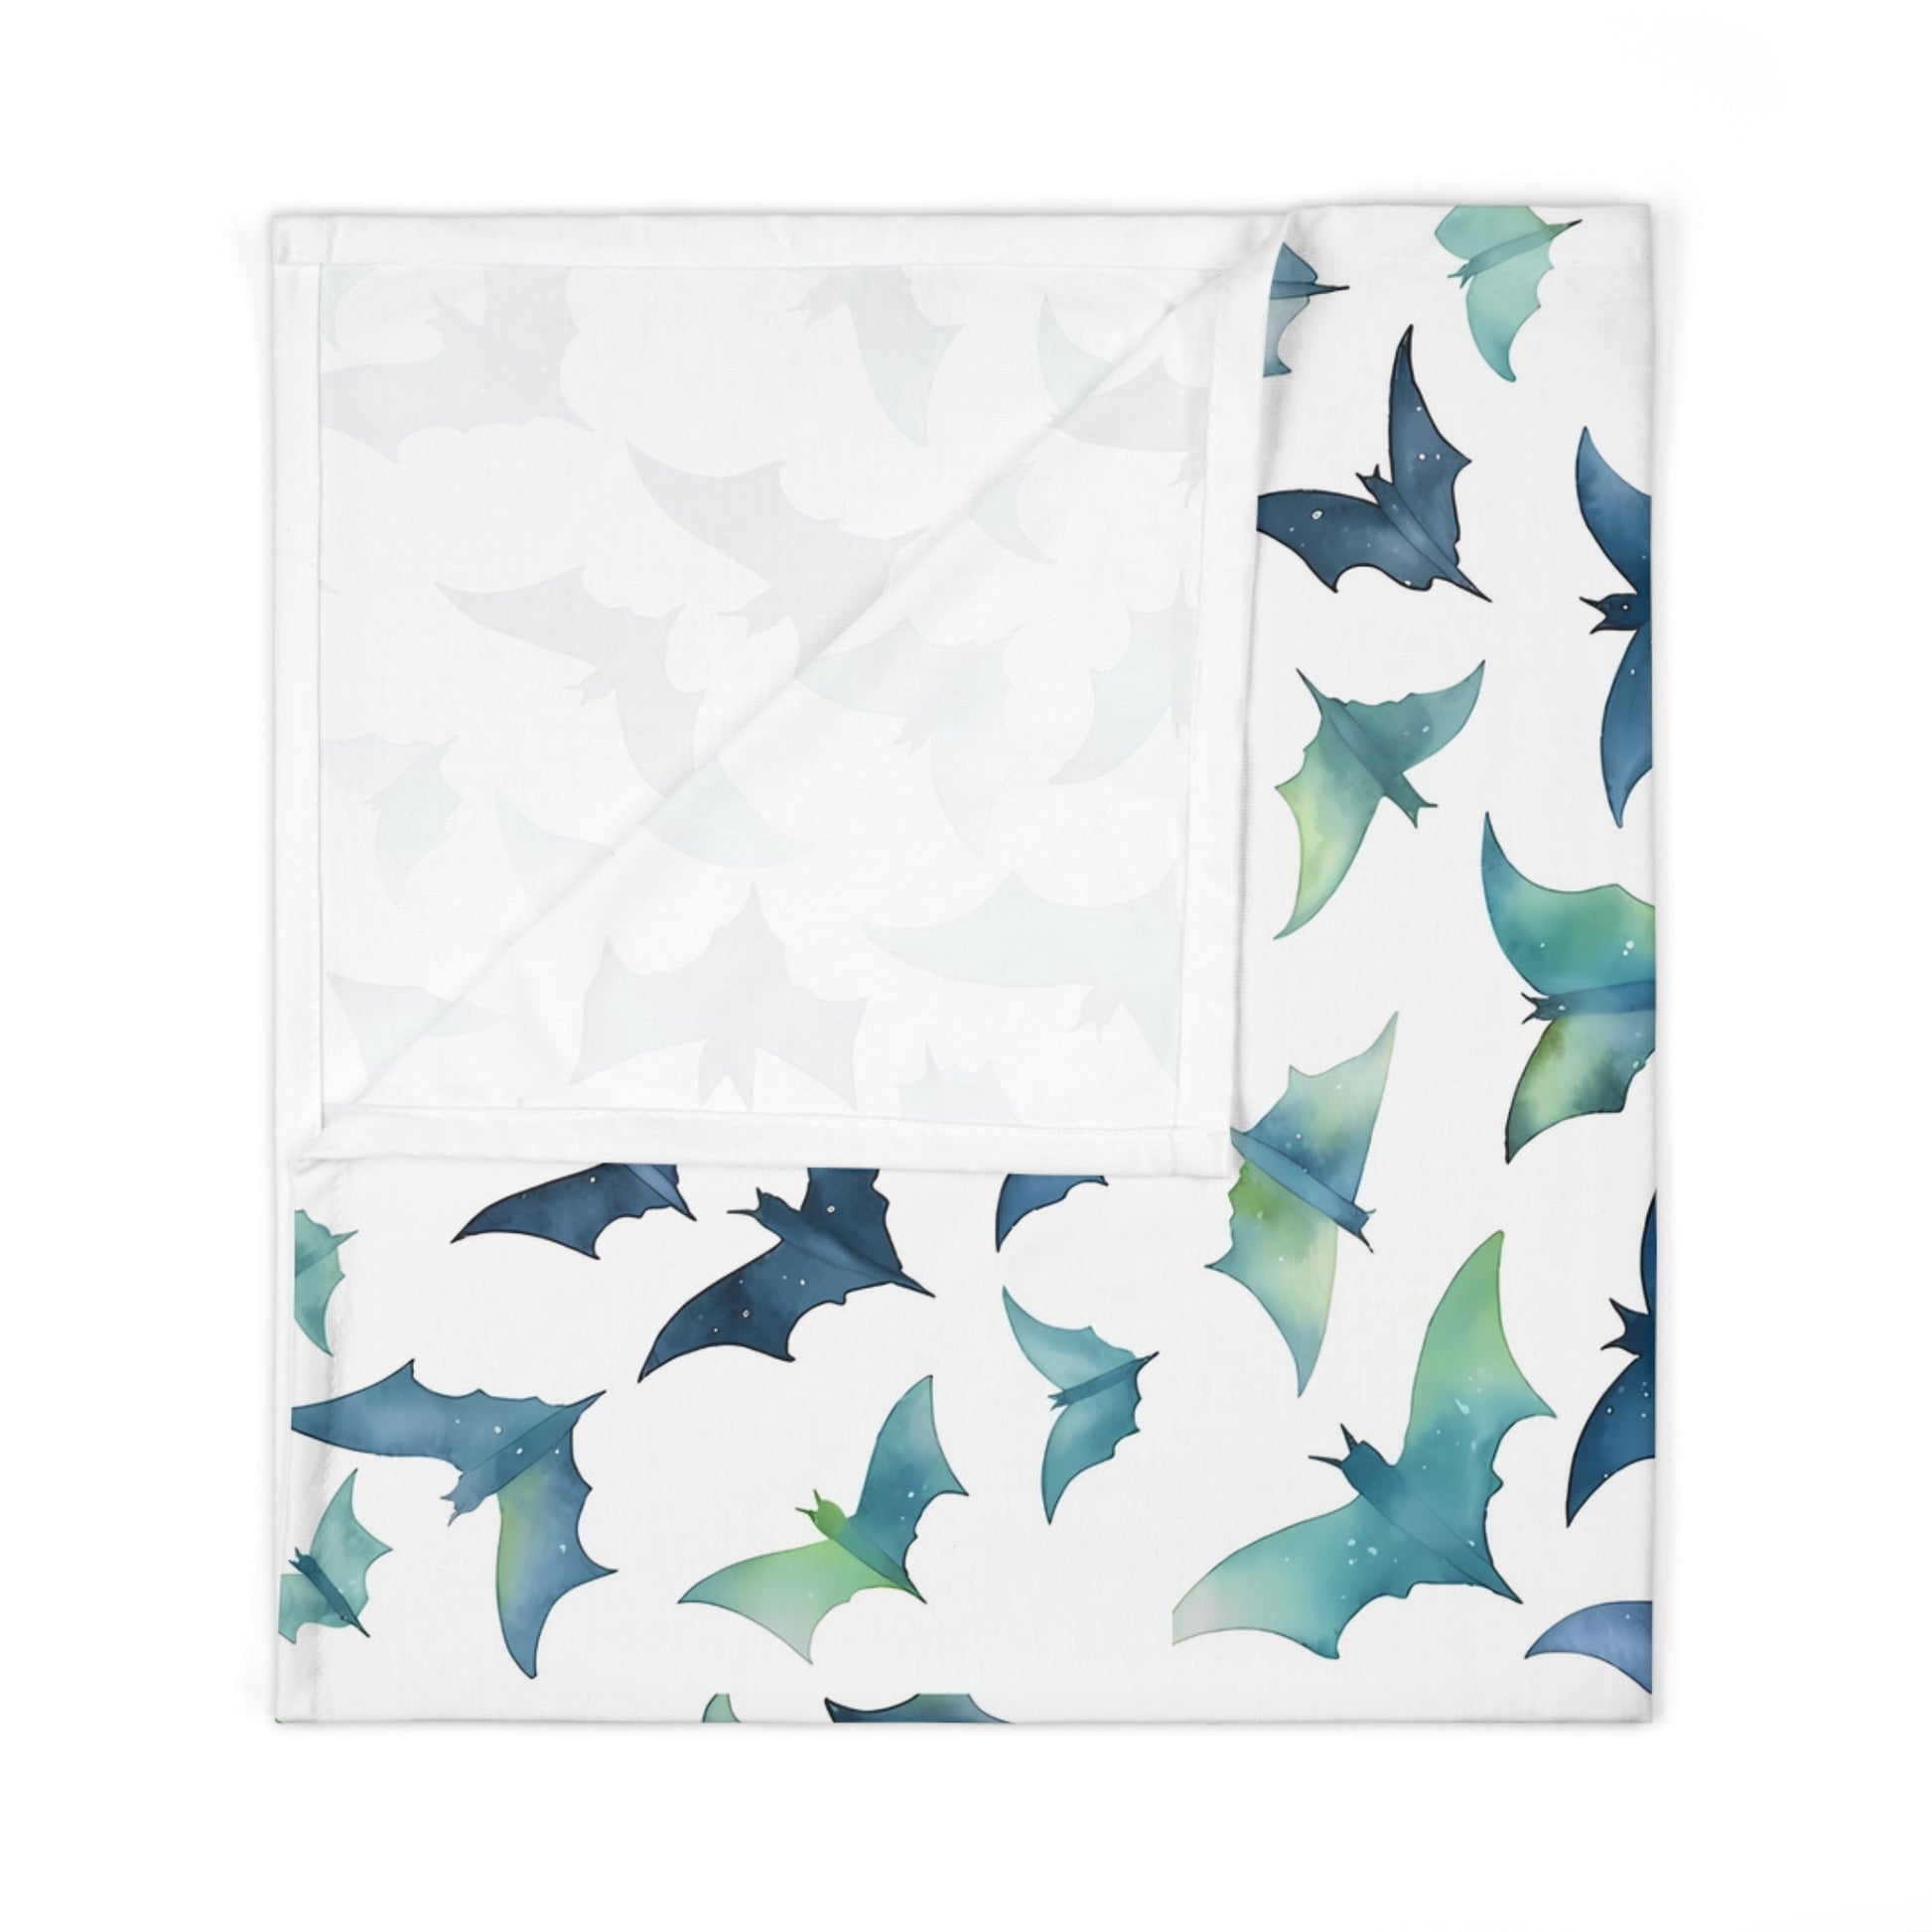 Blue Green Watercolor Bats Boys Baby Swaddle BlanketHome DecorVTZdesigns30" × 40"WhiteAccessoriesAll Over PrintAOP